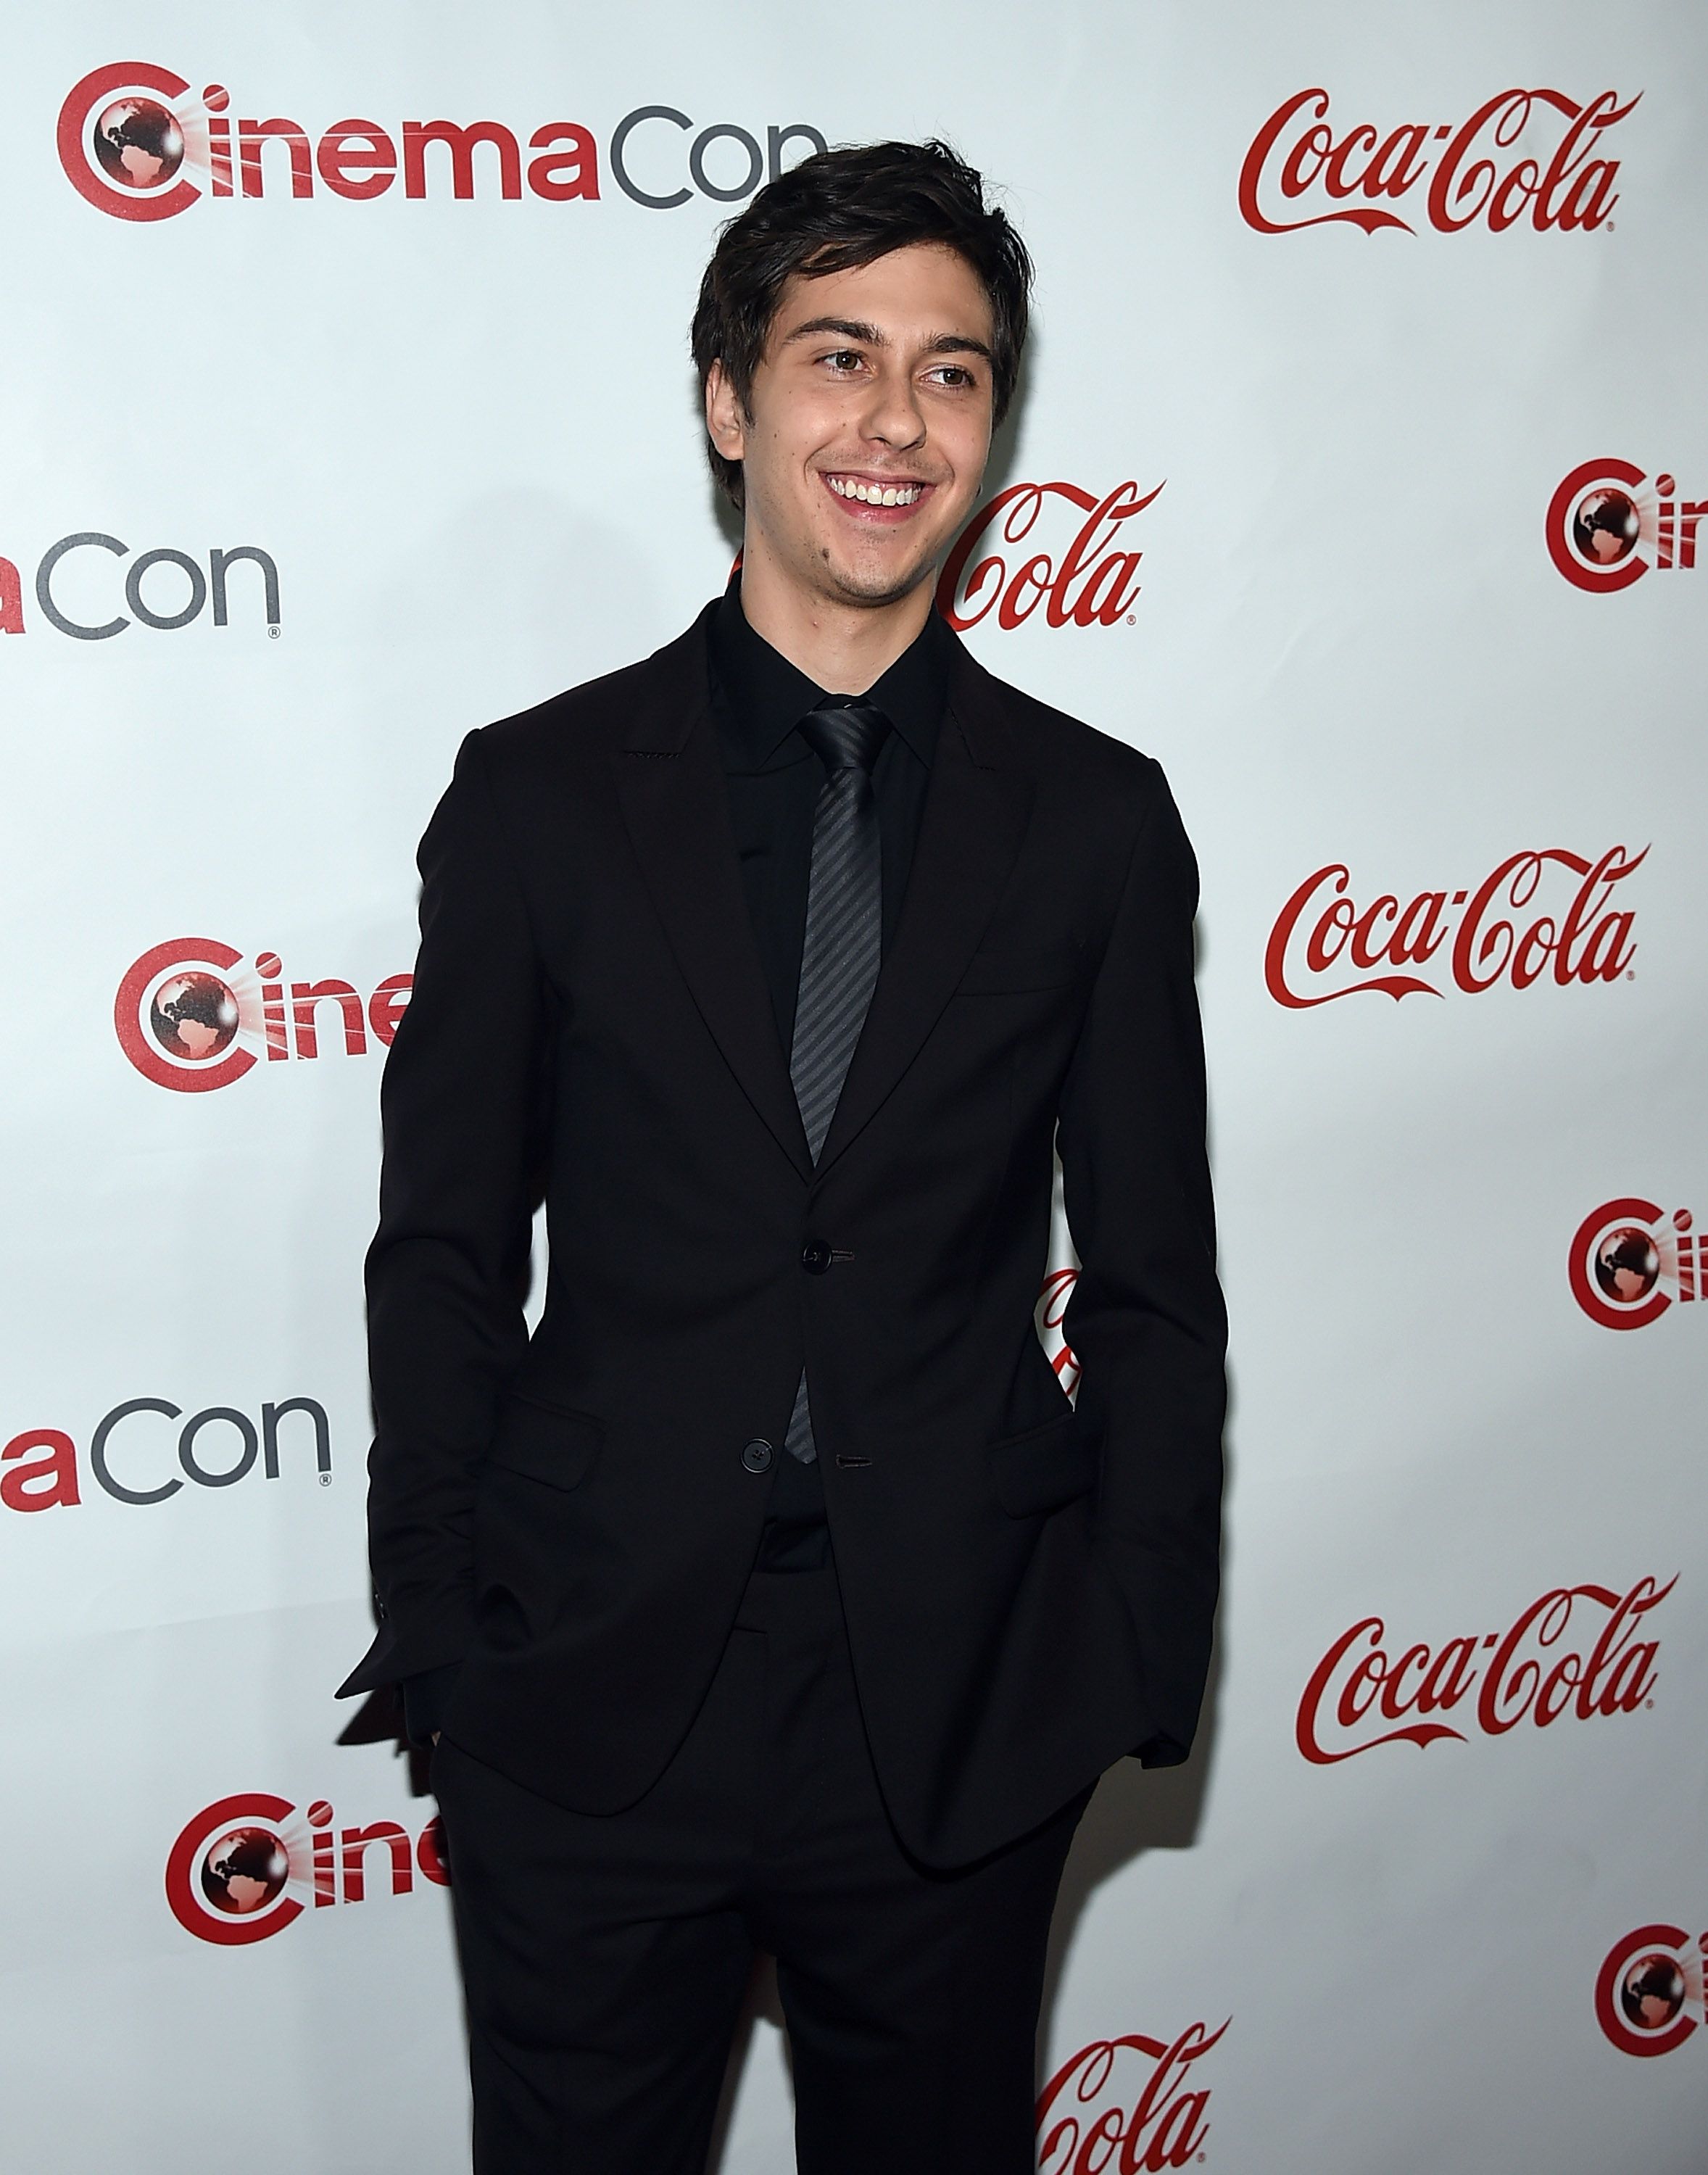 Nat Wolff Will Have An Original Song On The Paper Towns Soundtrack He is go...